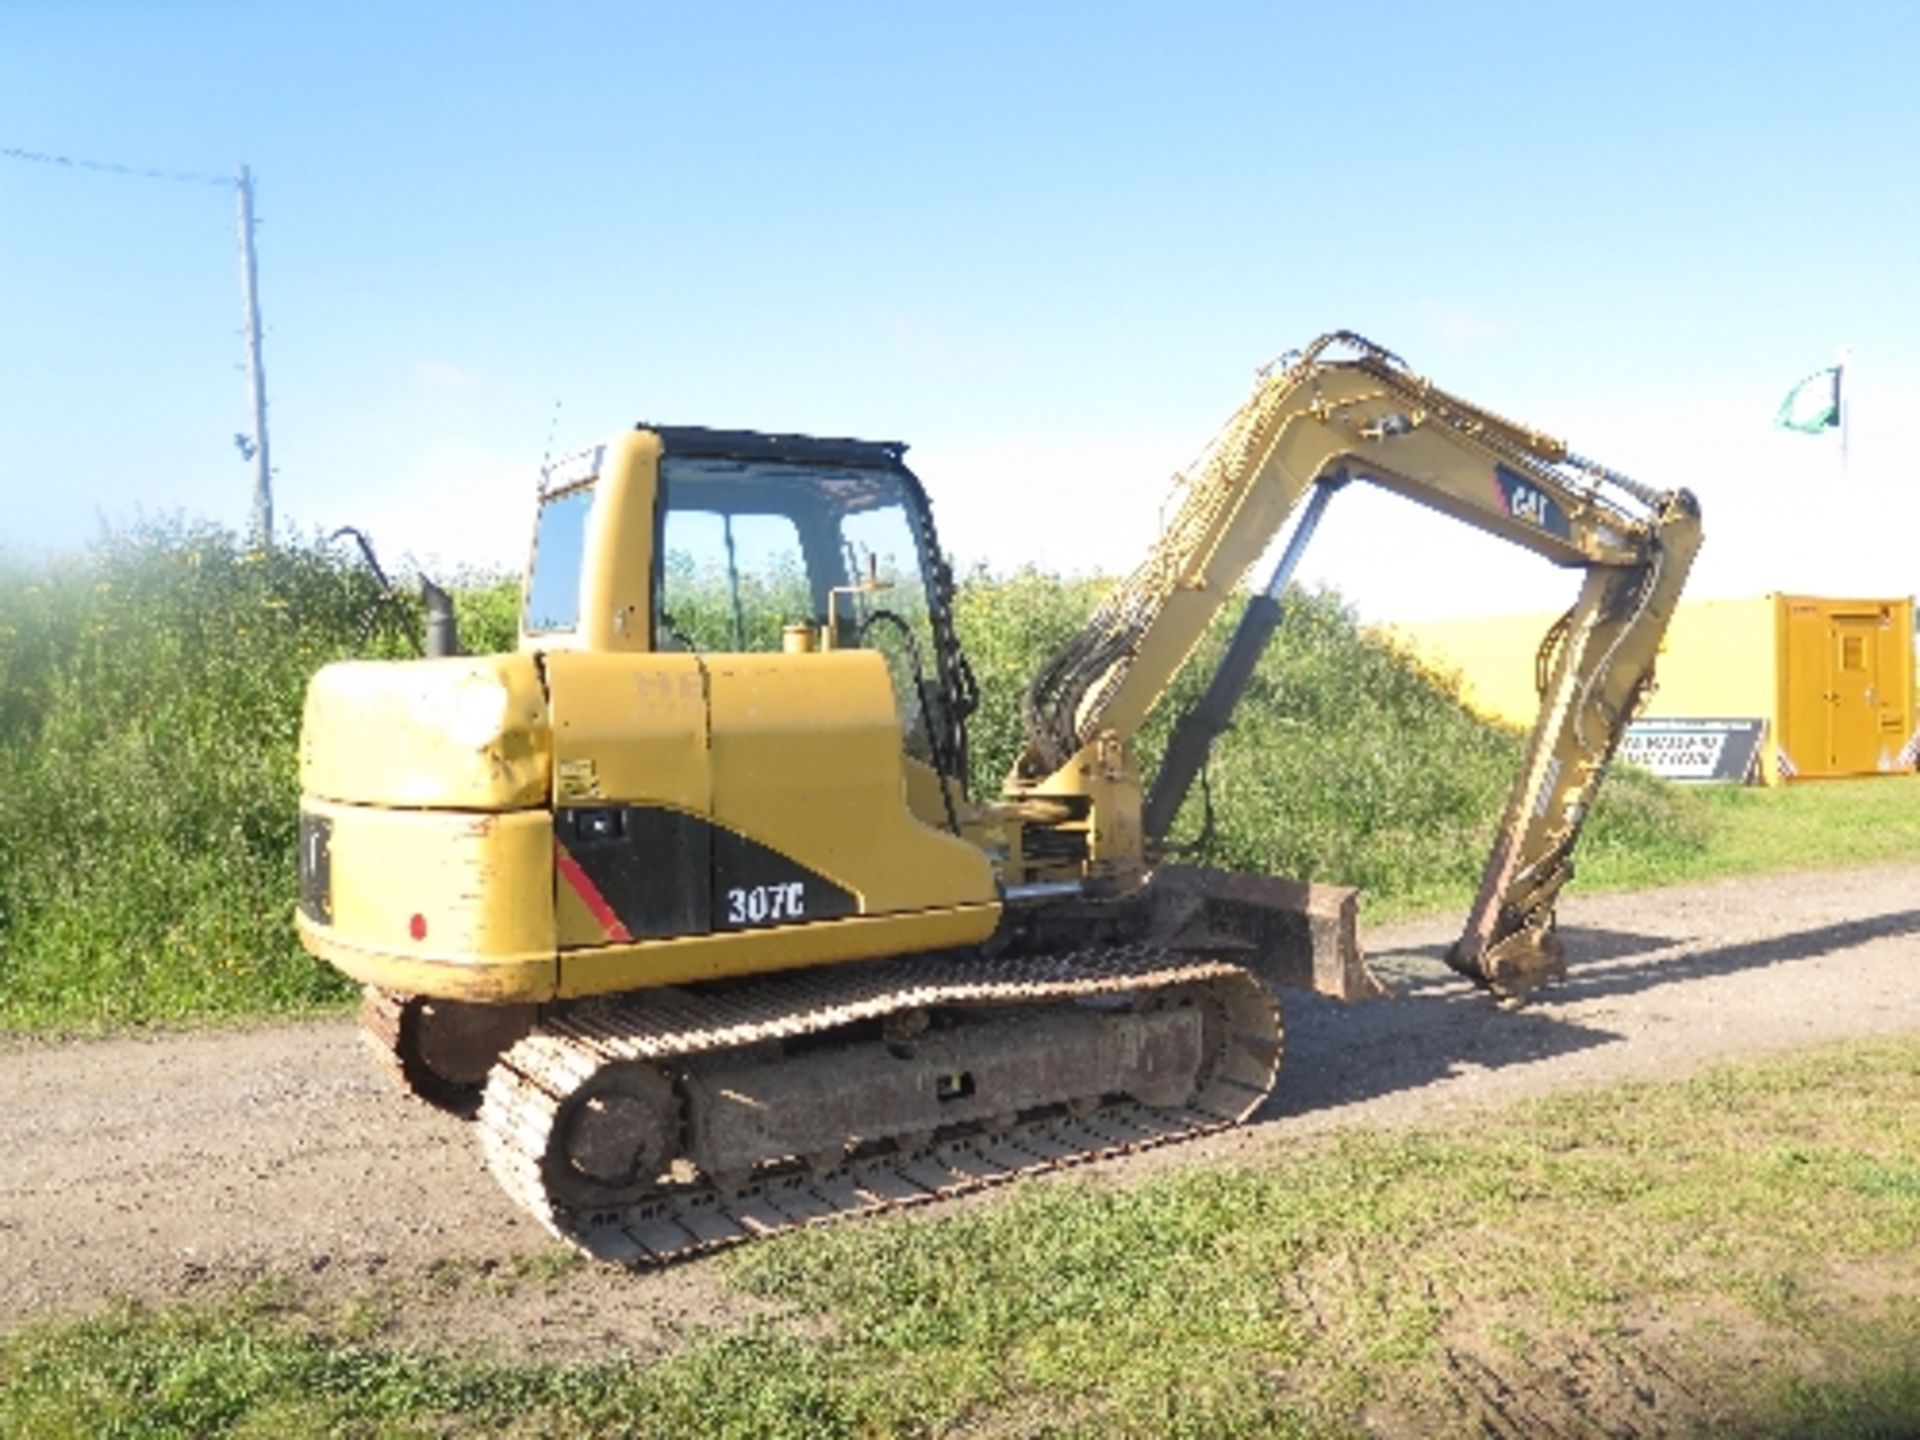 Caterpillar 307C midi excavator 3941 hrs 2008 5003471ALL LOTS are SOLD AS SEEN WITHOUT WARRANTY